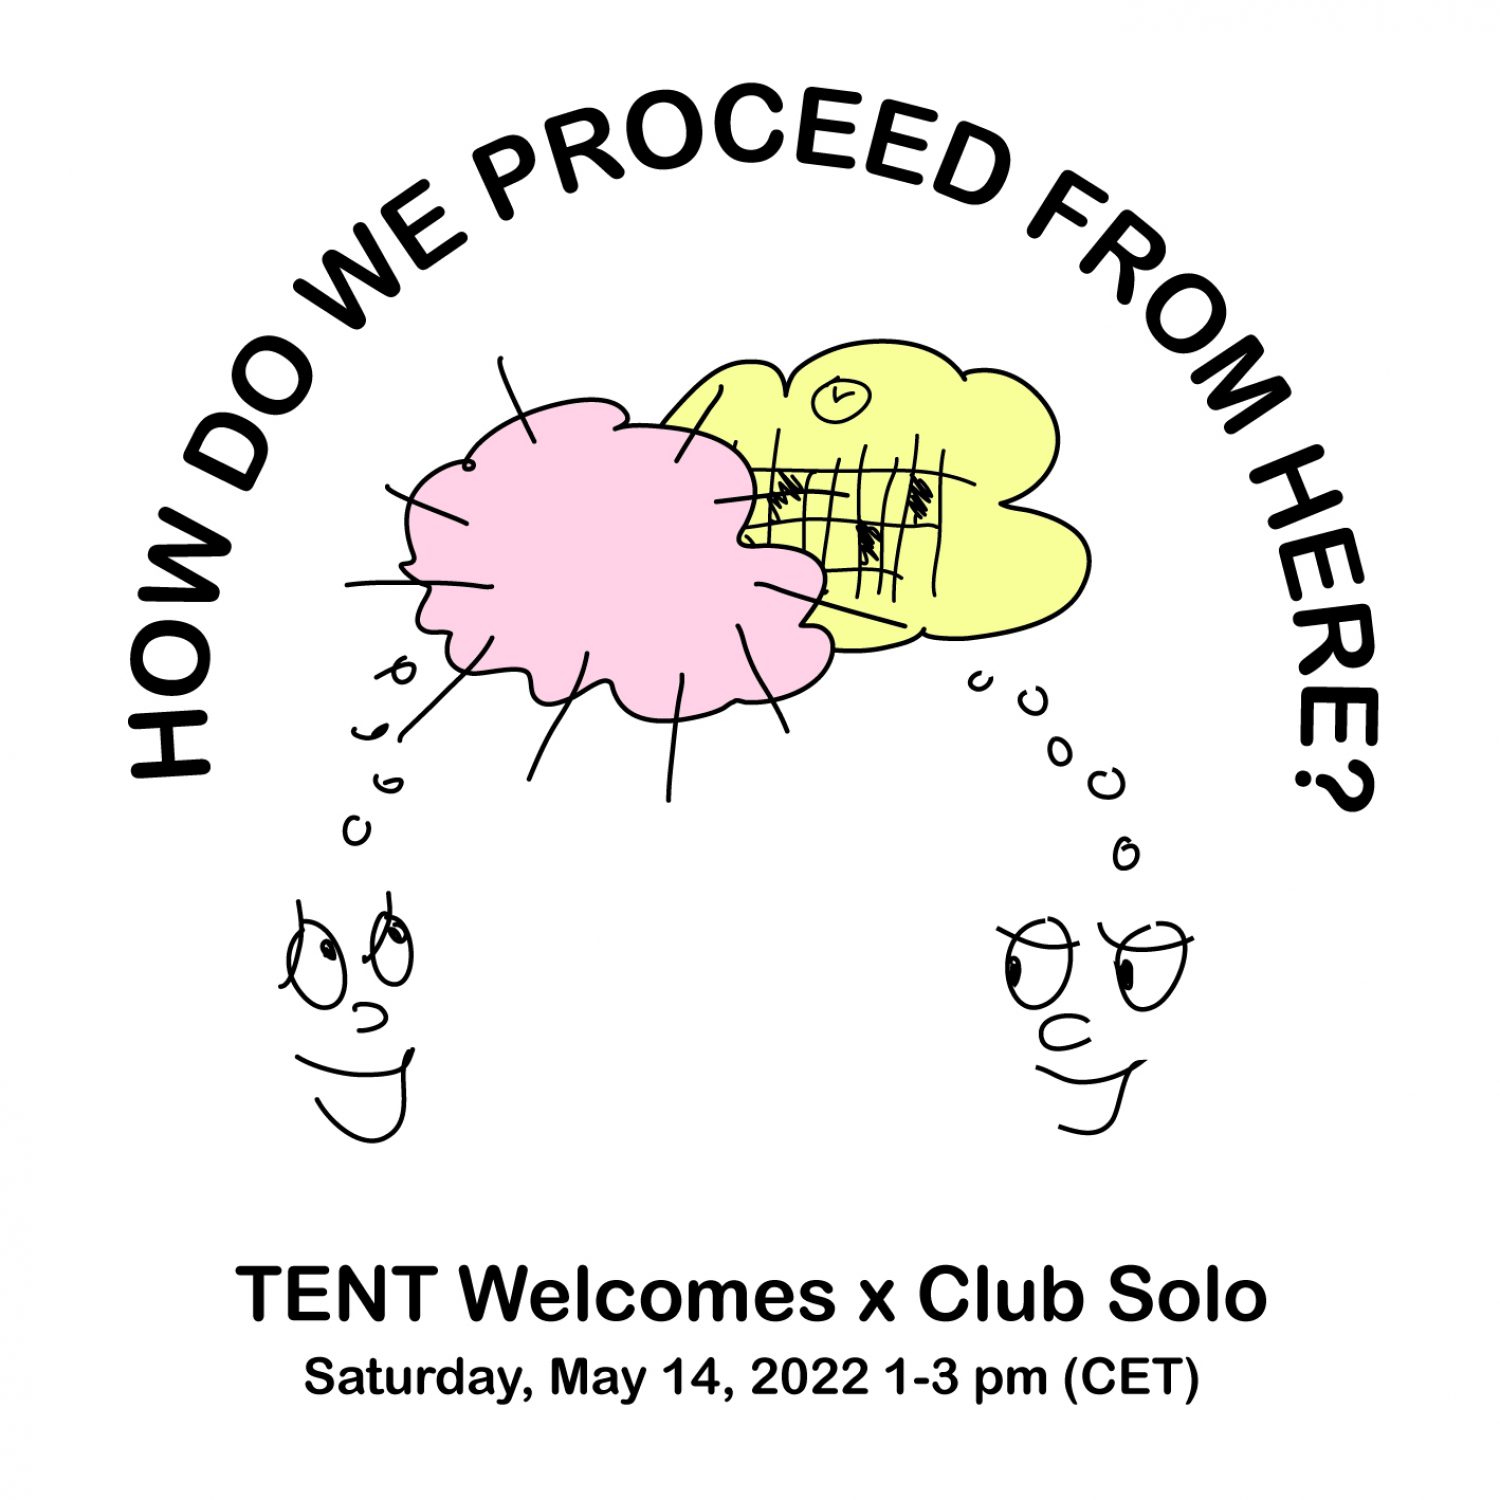 TENT Welcomes Club Solo: How Do We Proceed From Here?